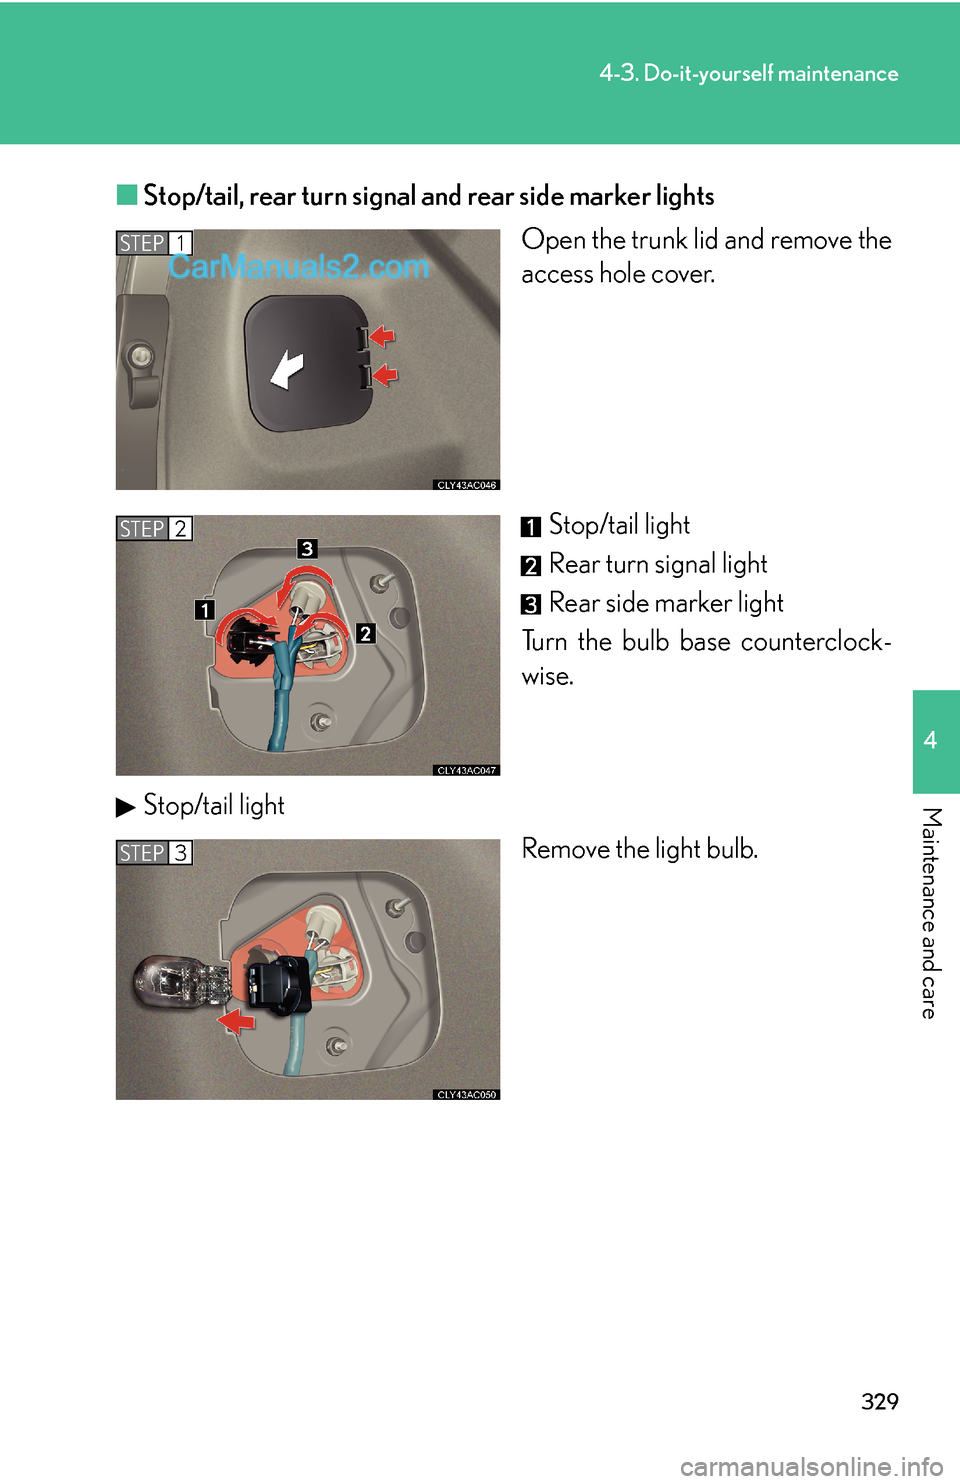 Lexus ES350 2007  Do-it-yourself maintenance 329
4-3. Do-it-yourself maintenance
4
Maintenance and care
■Stop/tail, rear turn signal and rear side marker lights
Open the trunk lid and remove the
access hole cover.
Stop/tail light
Rear turn sig